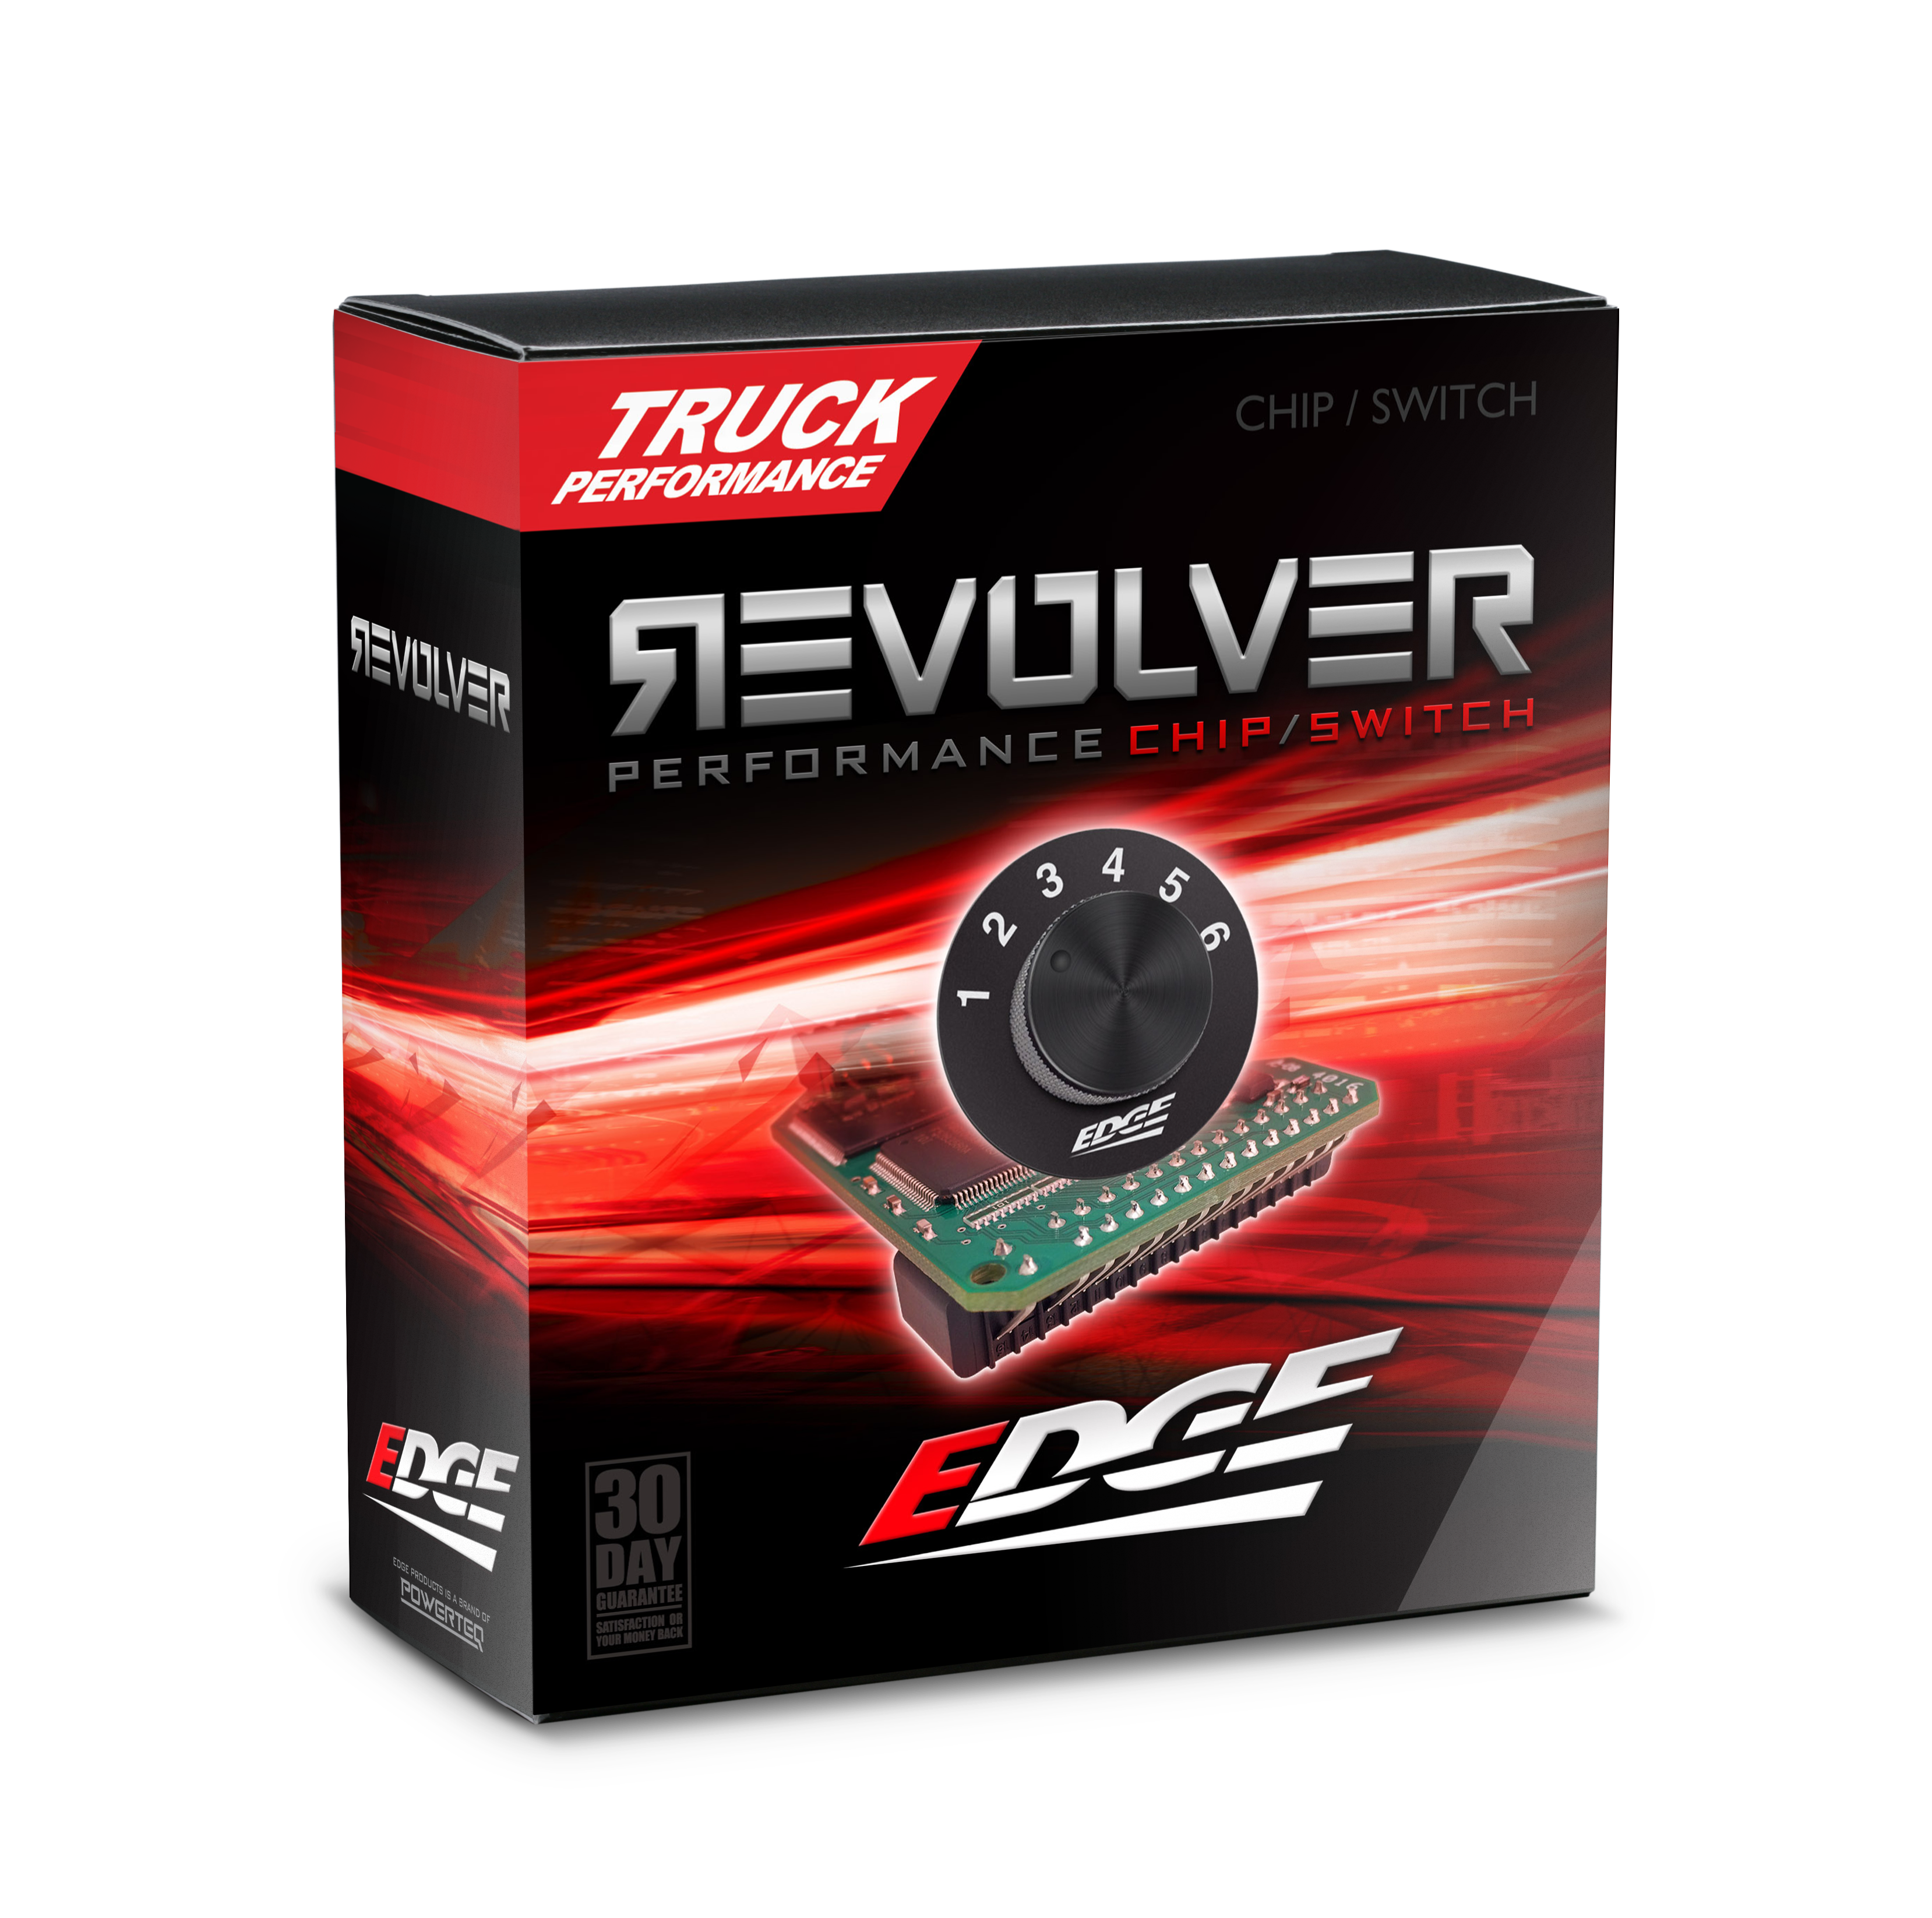 REVOLVER PERFORMANCE CHIP/SWITCH FORD 7.3L  build date 98 Auto 6-Chip Master Box Code XLE7